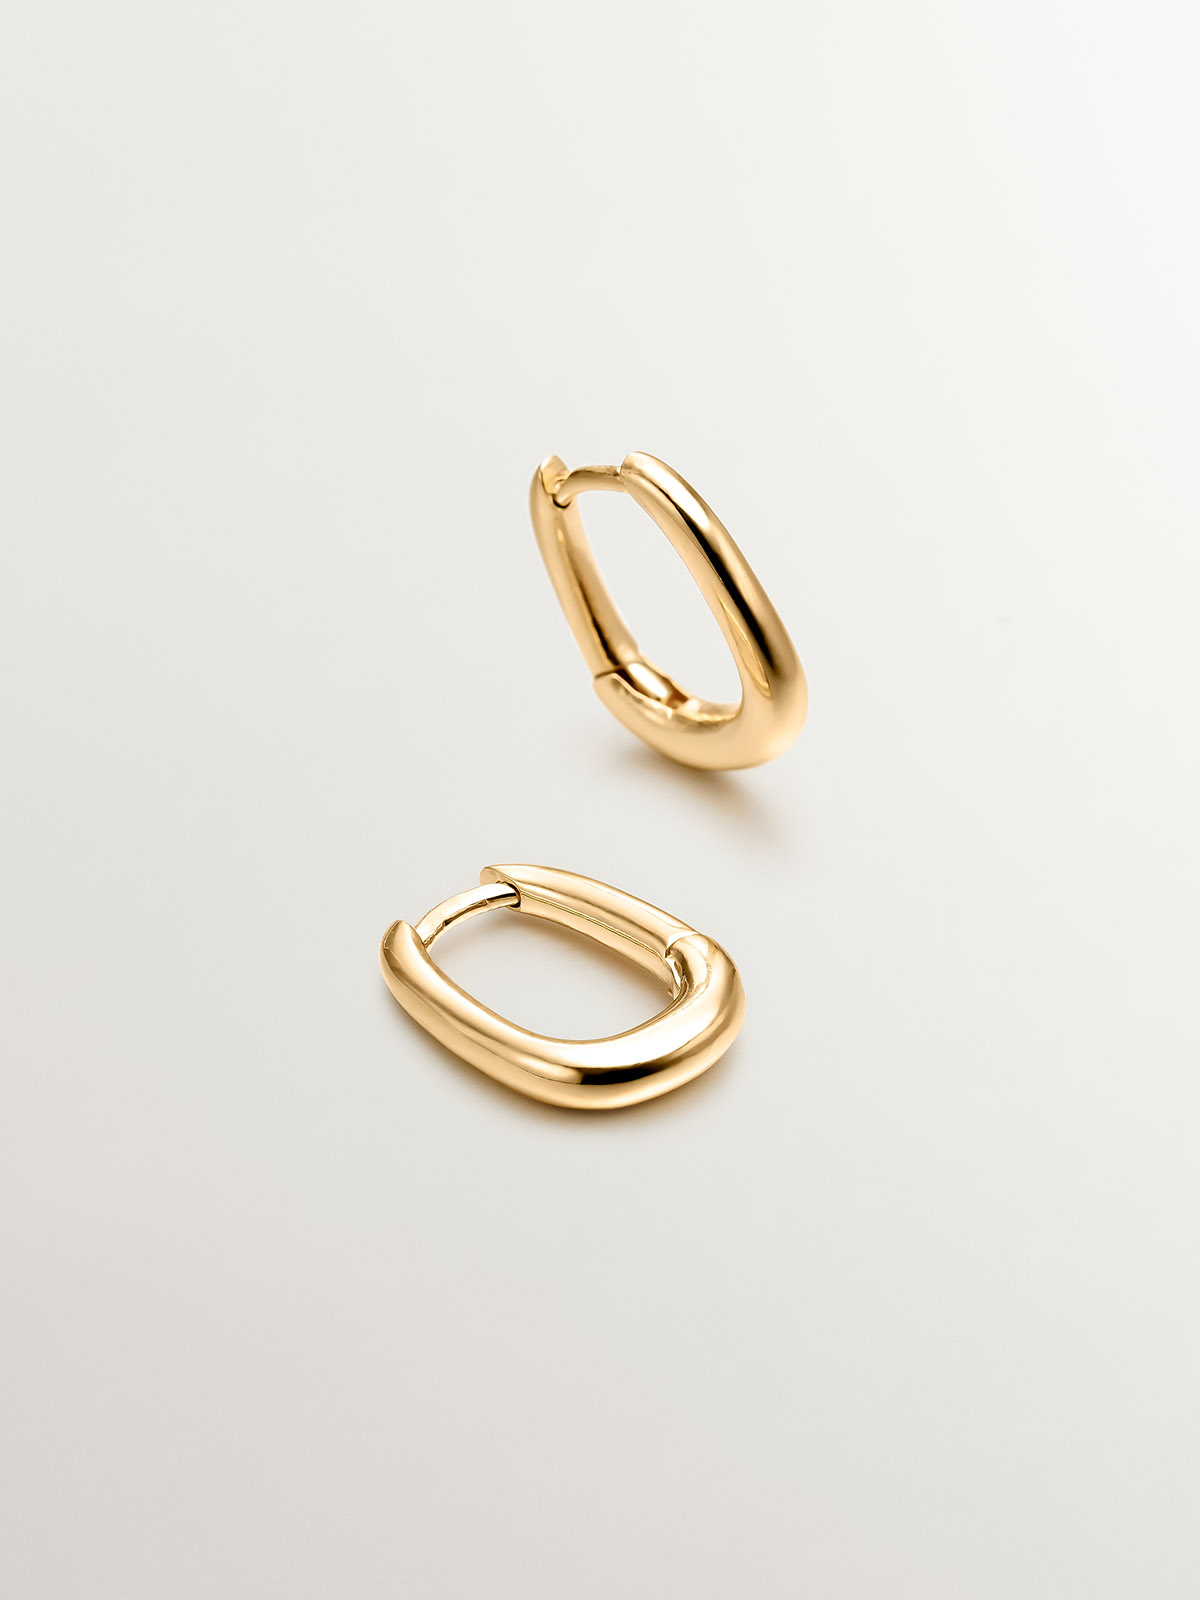 925 thick silver ring earrings in 18k yellow gold